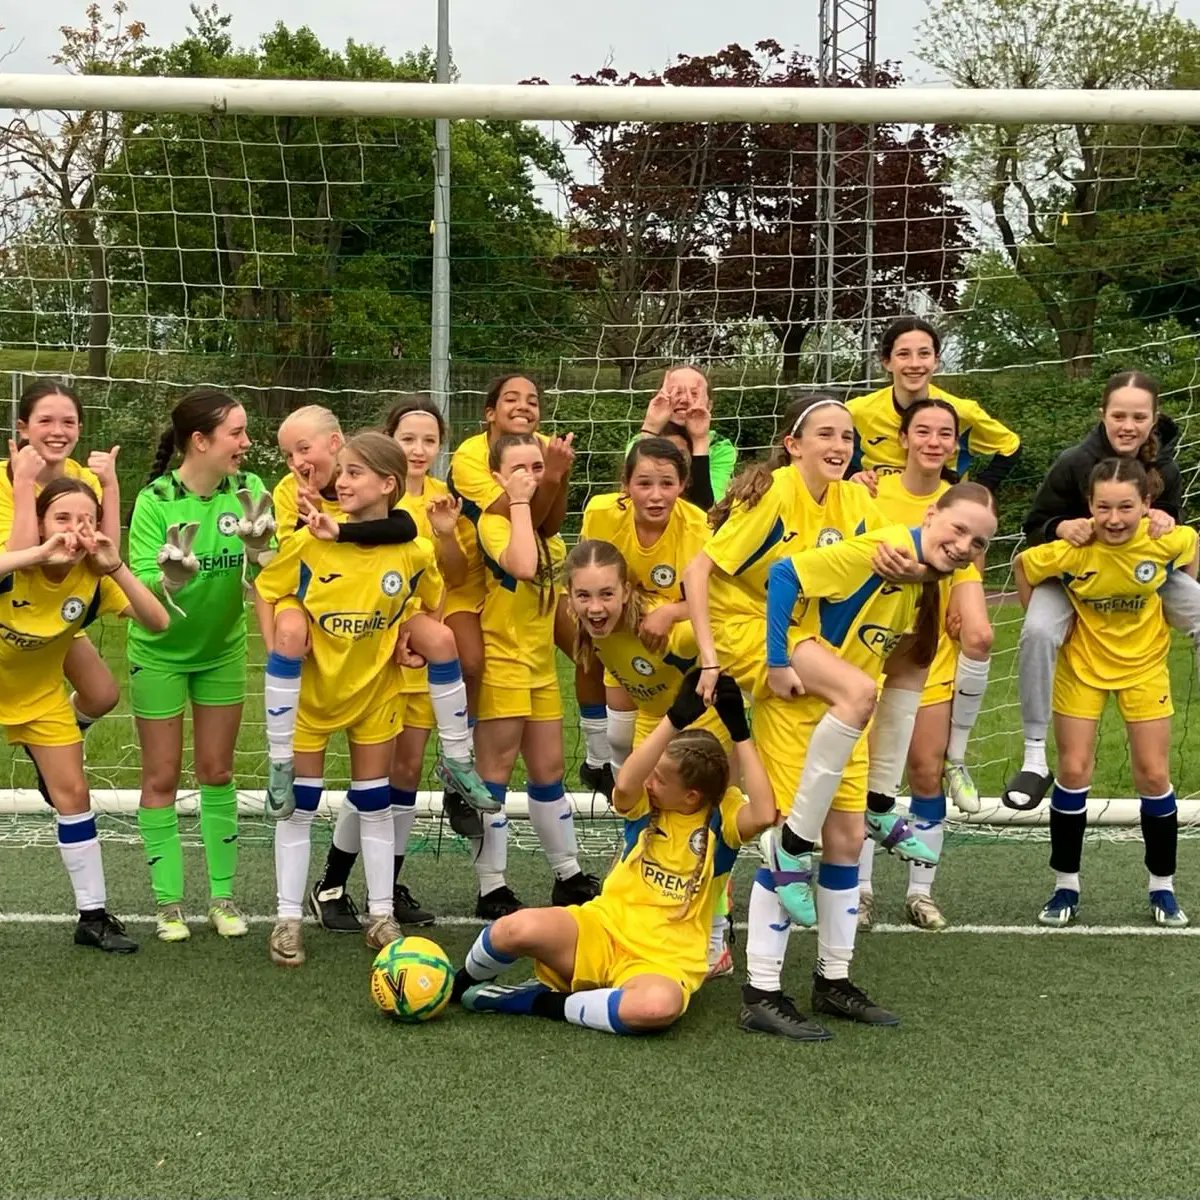 Under 12 girls put on another great show tonight against @SpursOfficial in the capital. Another 11 aside friendly and another impressive win. 3-0 was the final result.